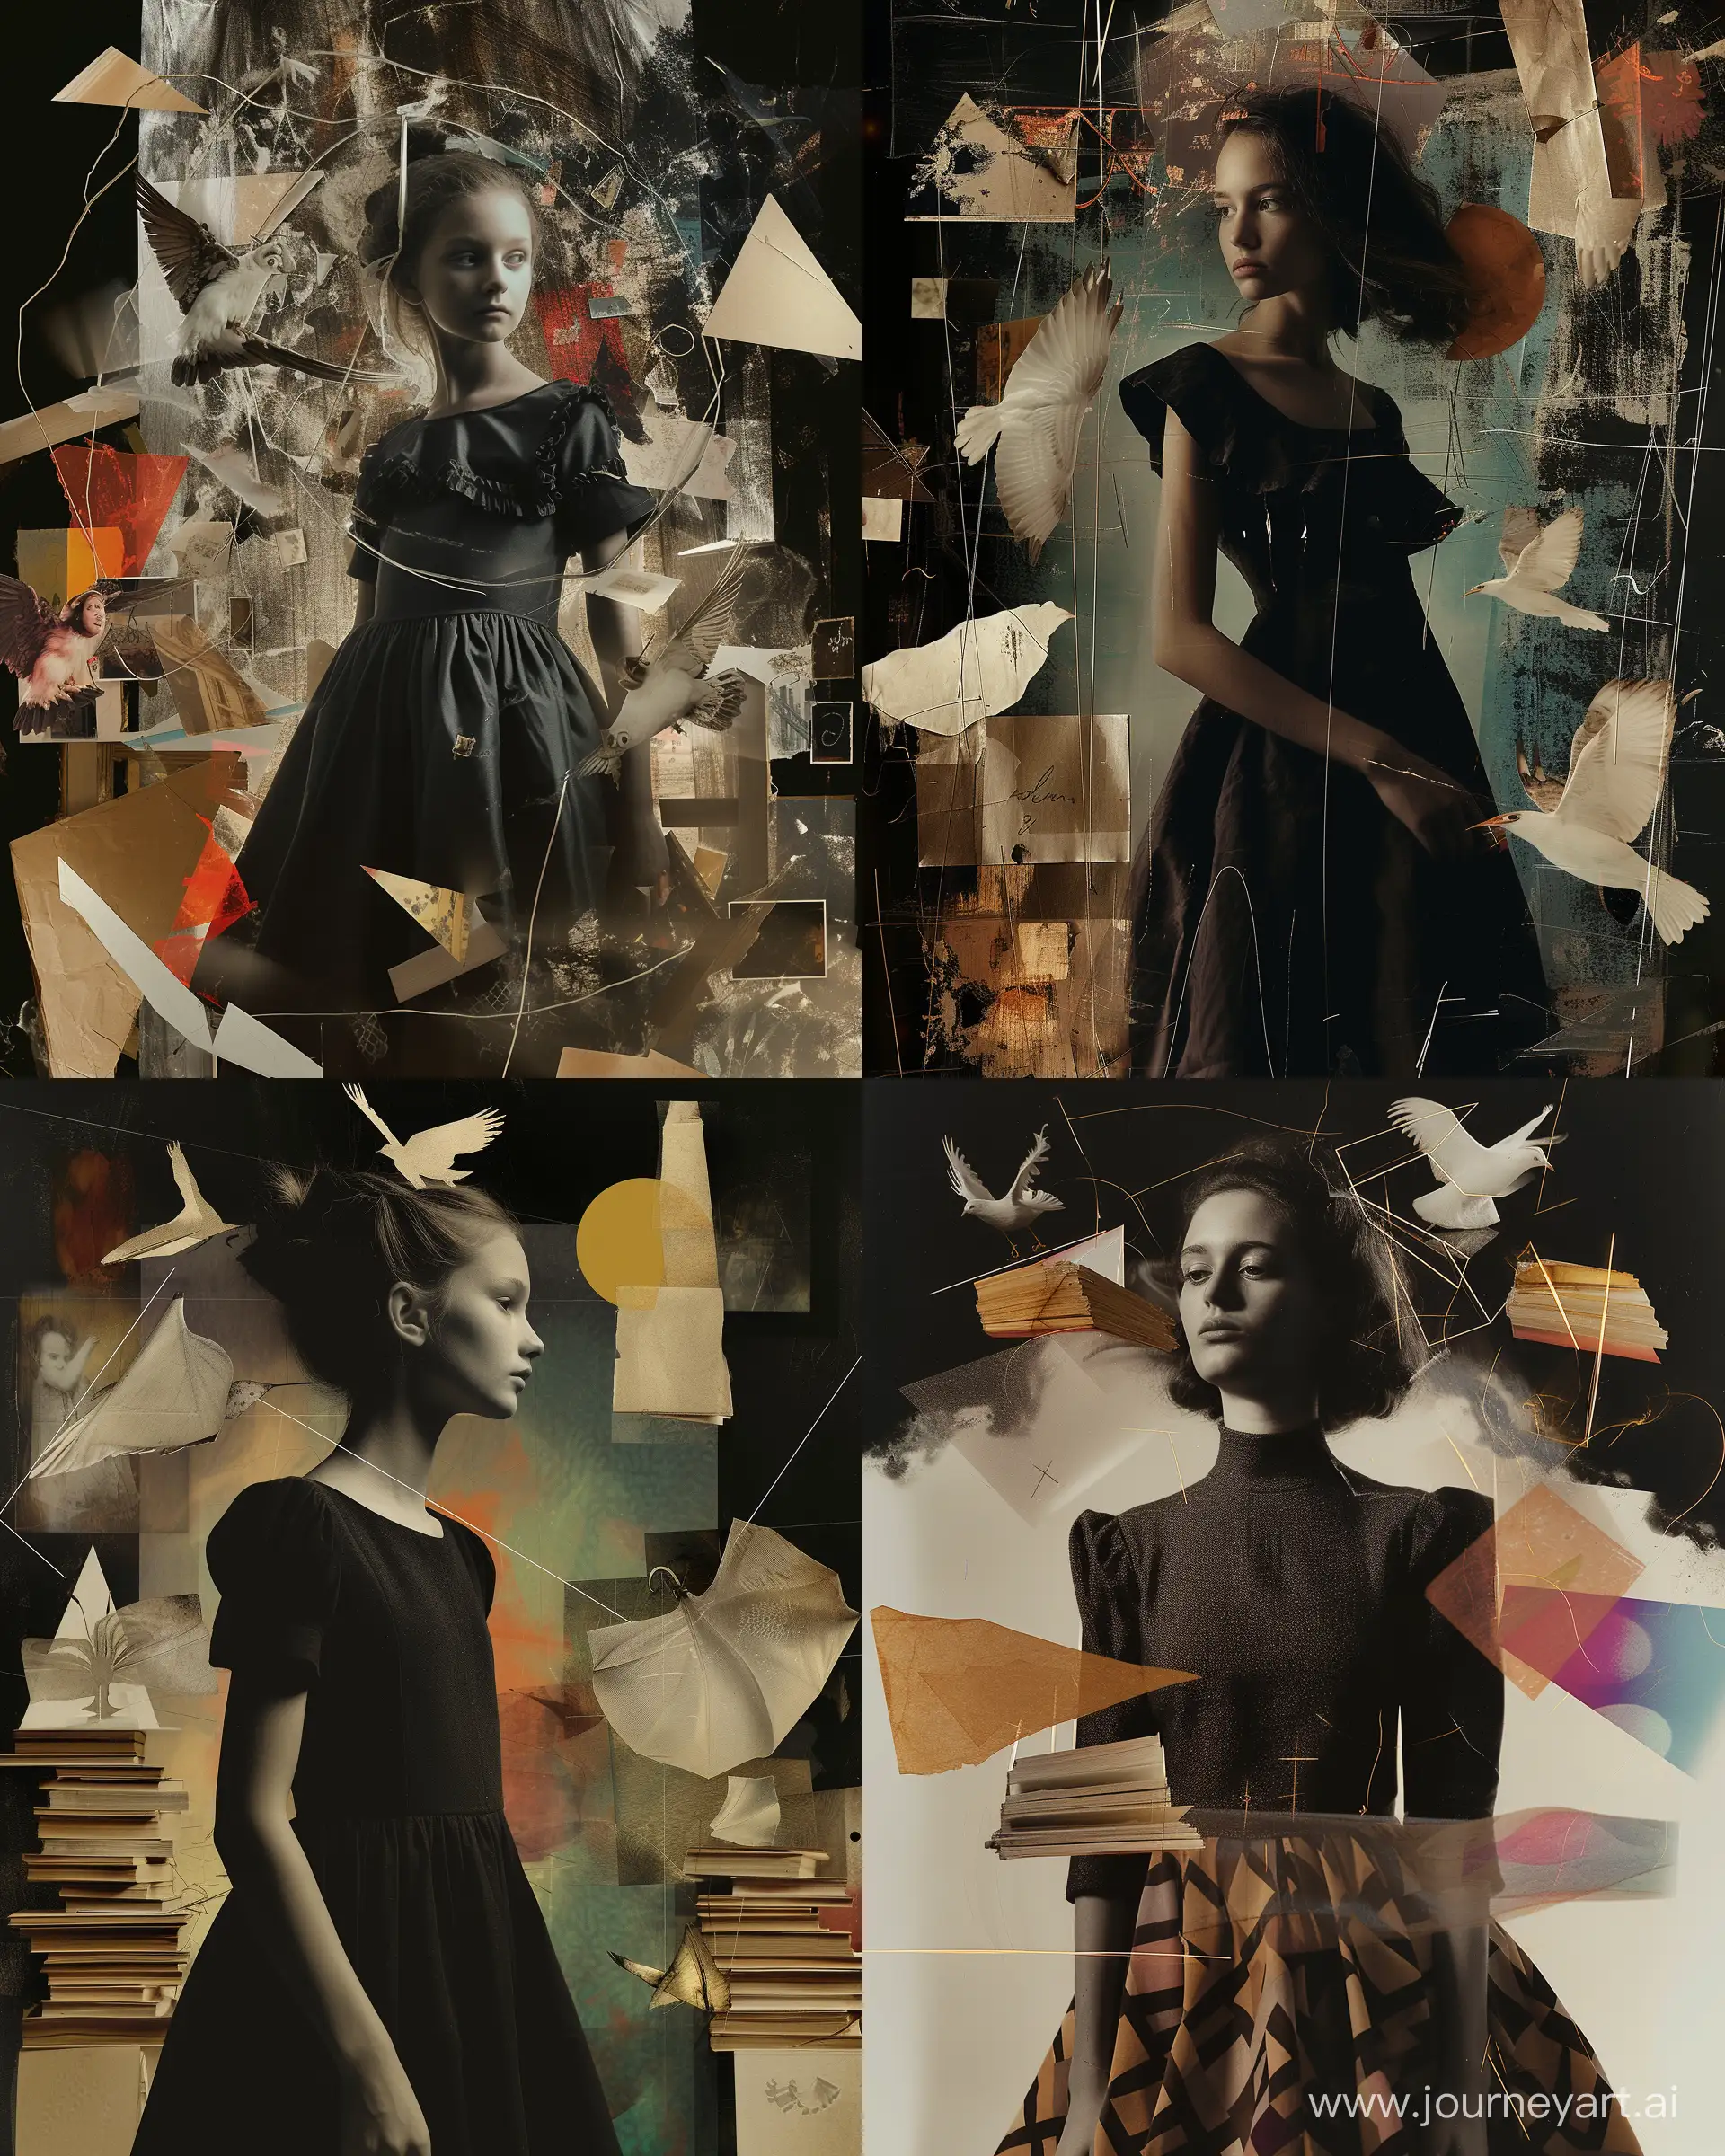 Surrealistic-Dadaism-Photomontage-Staged-Photography-of-a-Girl-in-Abstract-Collage-Atmosphere